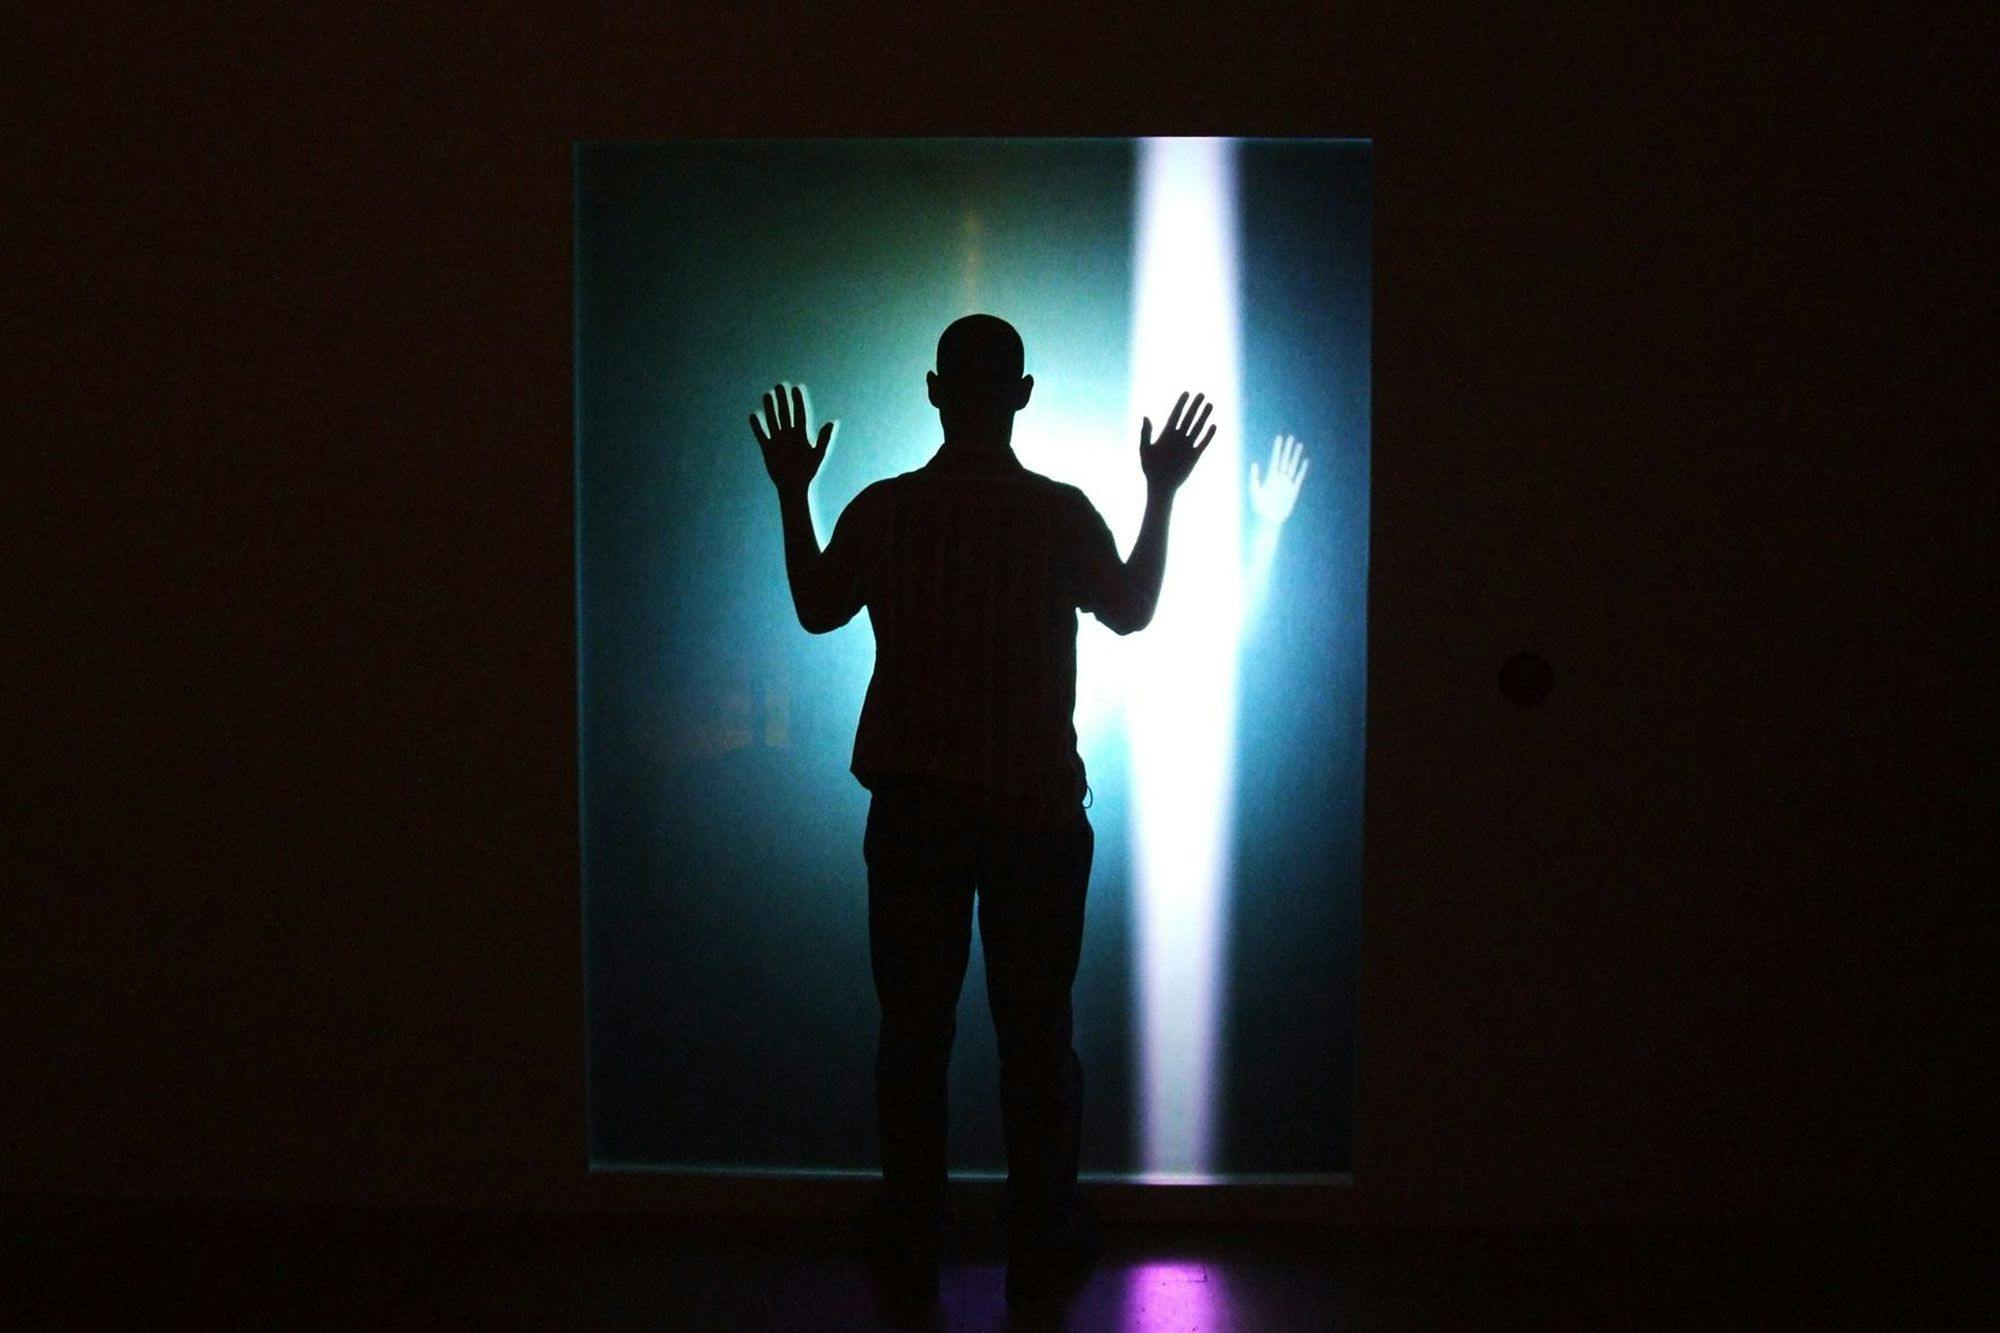 Silhouette of a person standing with their hands up in front of a line of bright light.